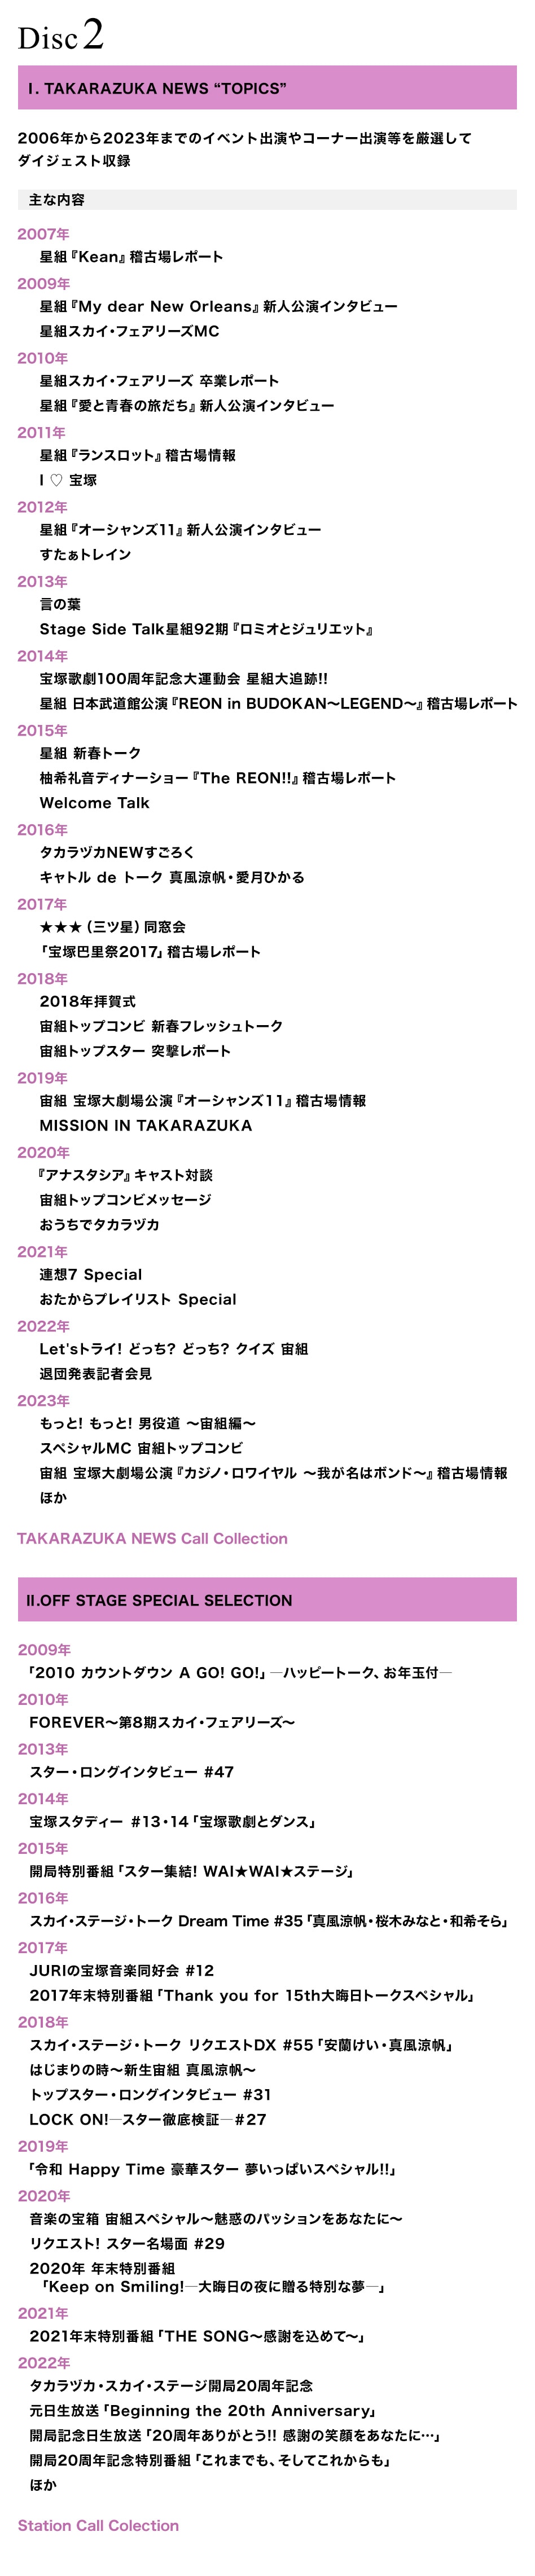 Disc2@1.TAKARAZUKA NEWS gTOPICSh^2.OFF STAGE SPECIAL SELECTION